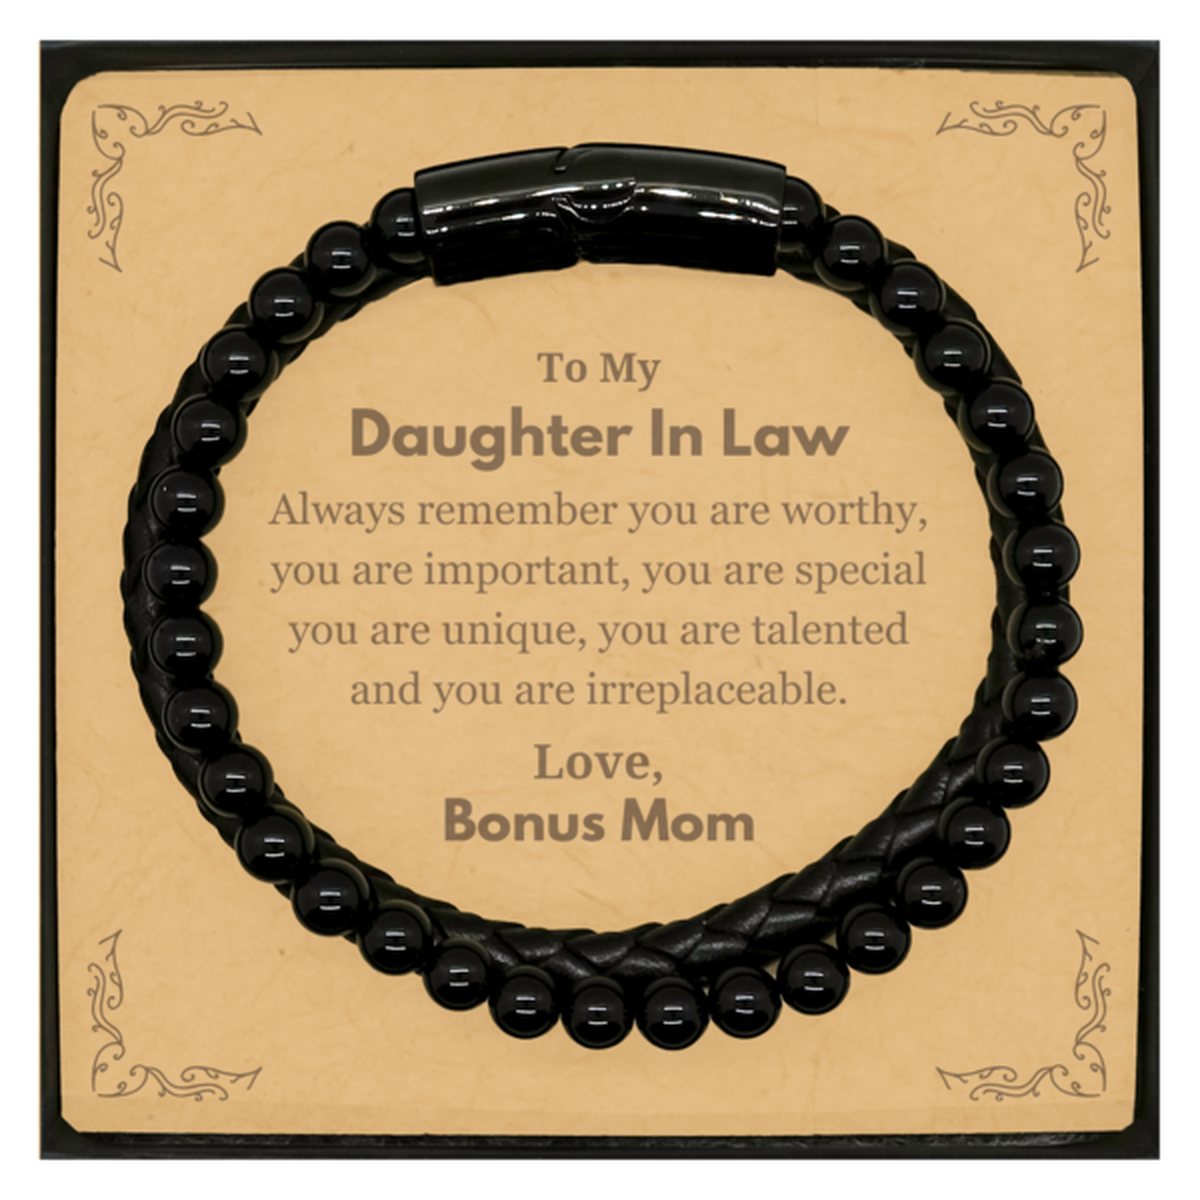 Daughter In Law Birthday Gifts from Bonus Mom, Inspirational Stone Leather Bracelets for Daughter In Law Christmas Graduation Gifts for Daughter In Law Always remember you are worthy, you are important. Love, Bonus Mom